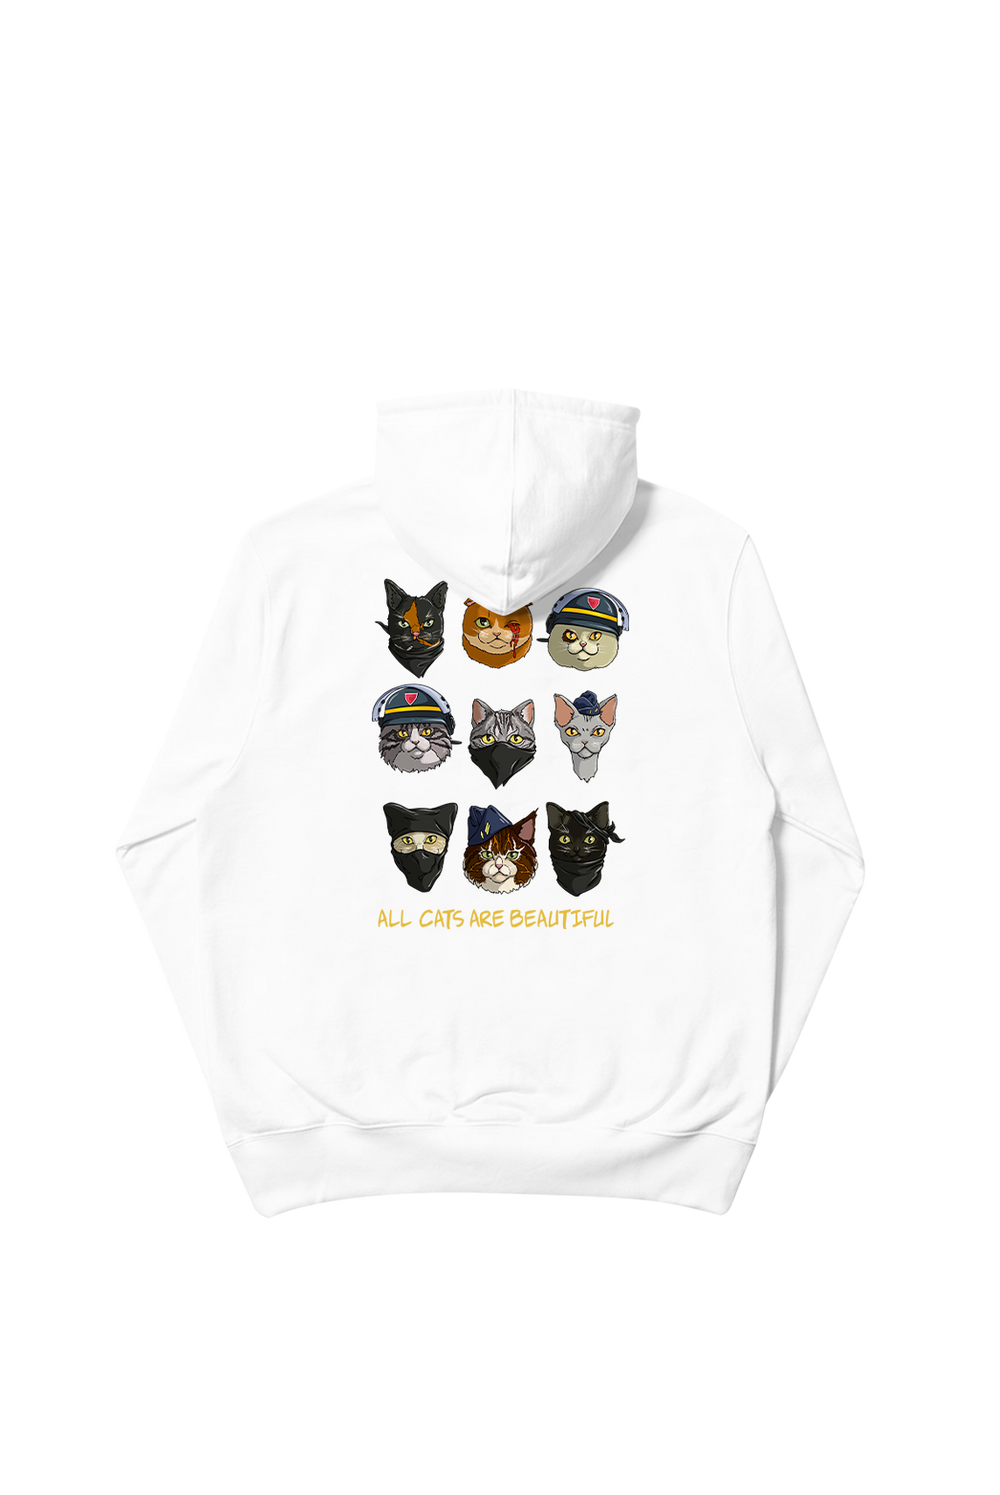 Acab all cats are beautifull, Hoodie White